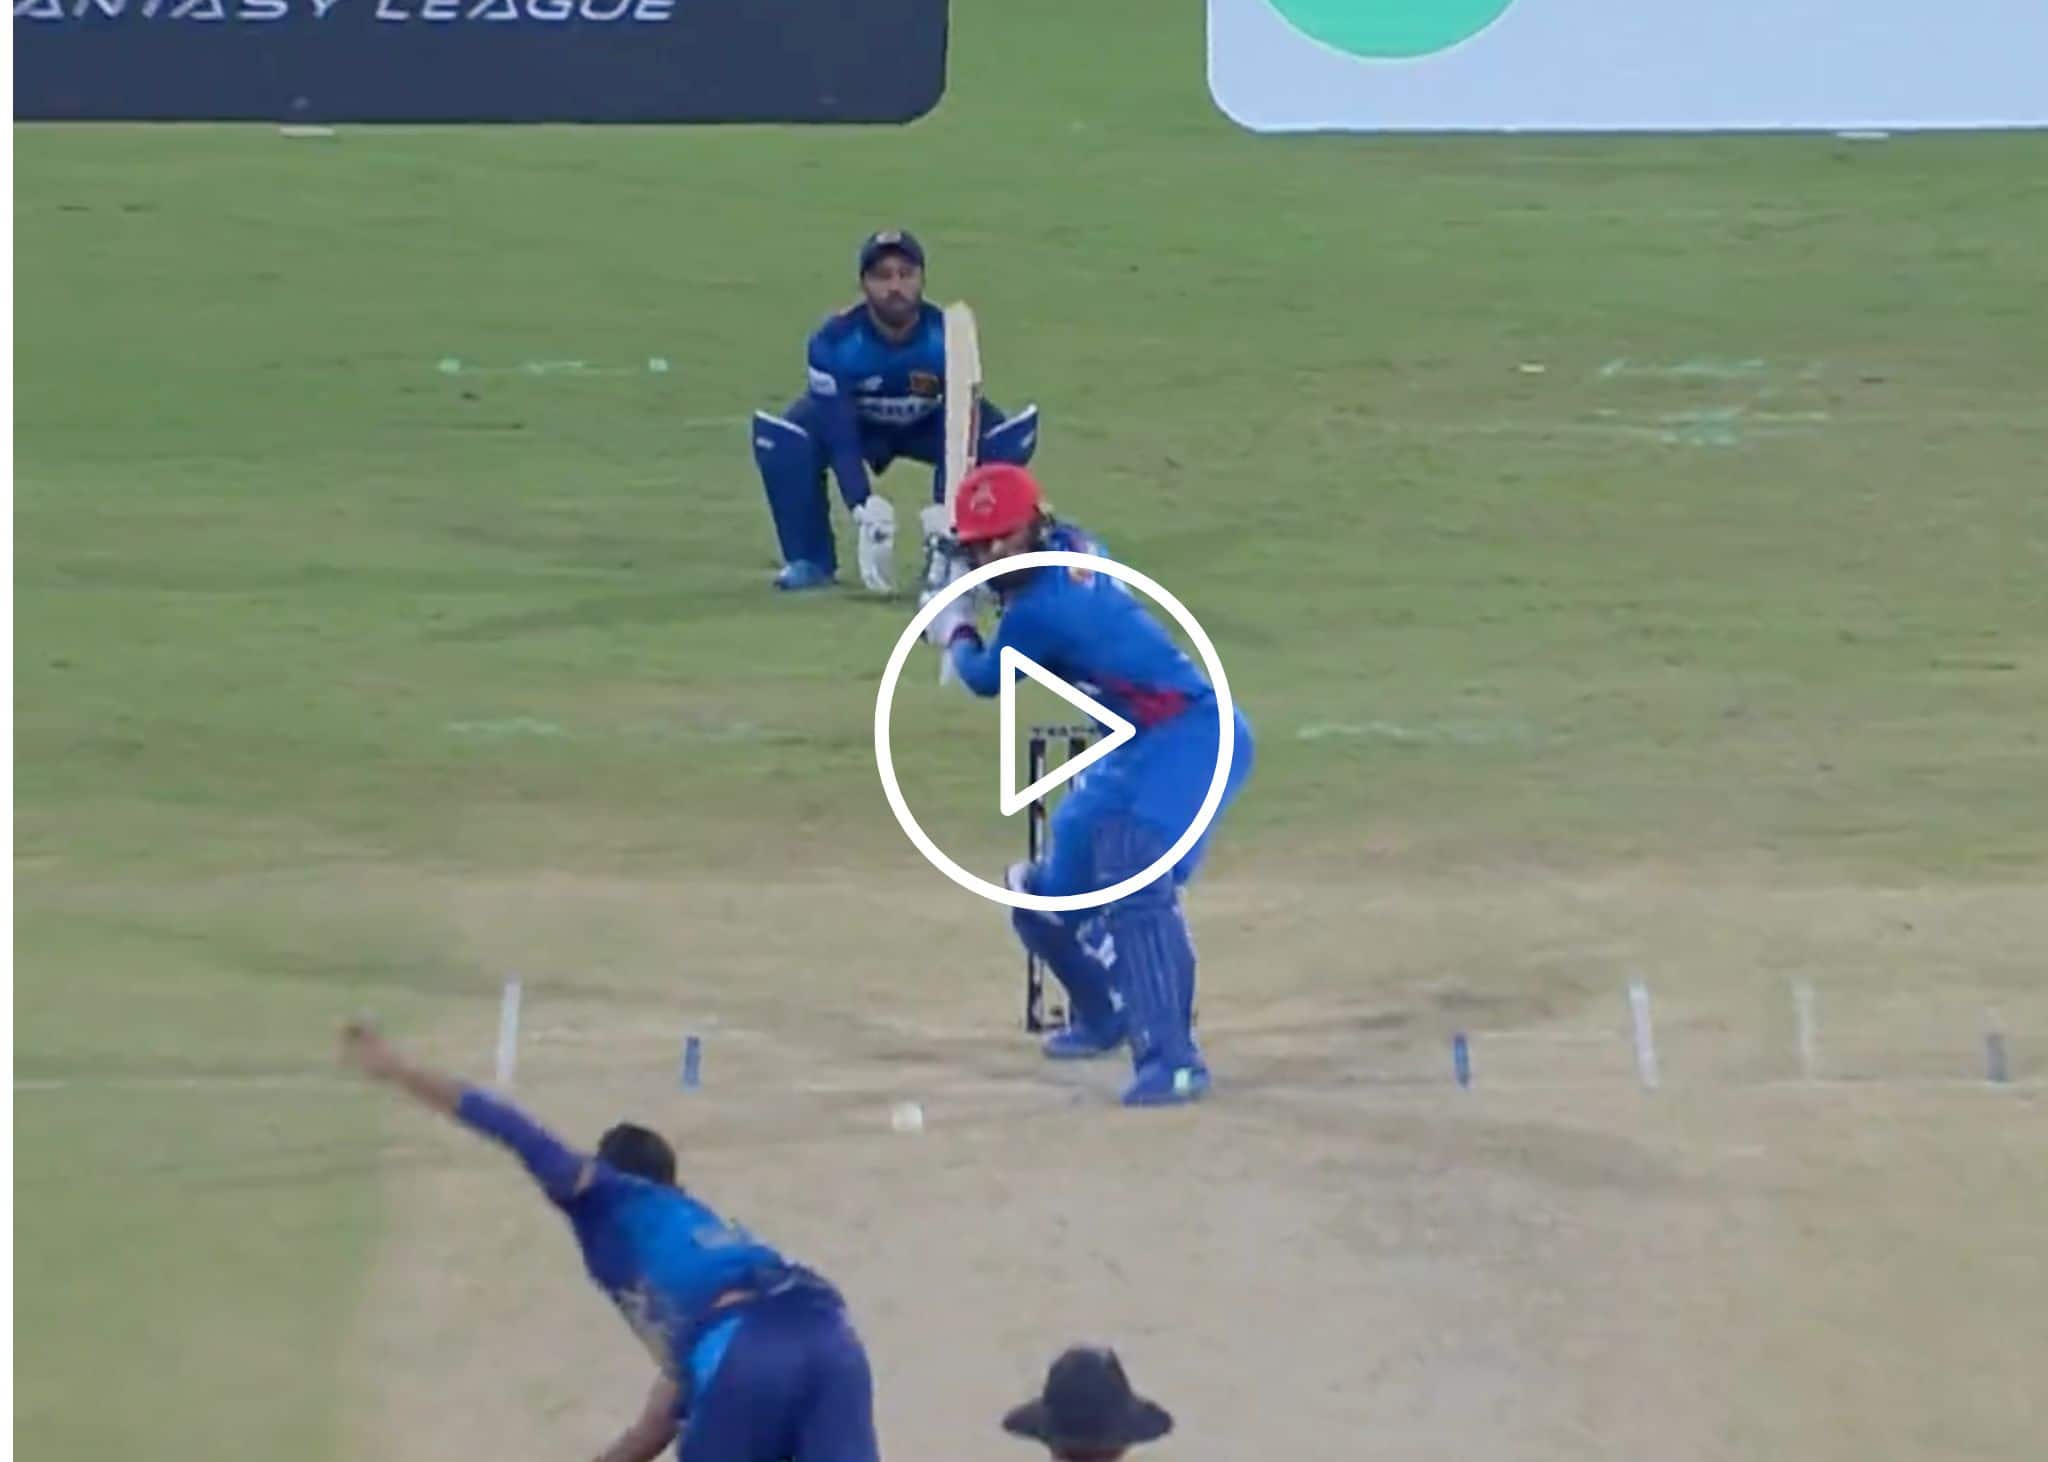 [Watch] Mohammad Nabi Turns Back The Clock, Records Fastest ODI Fifty For AFG vs SL